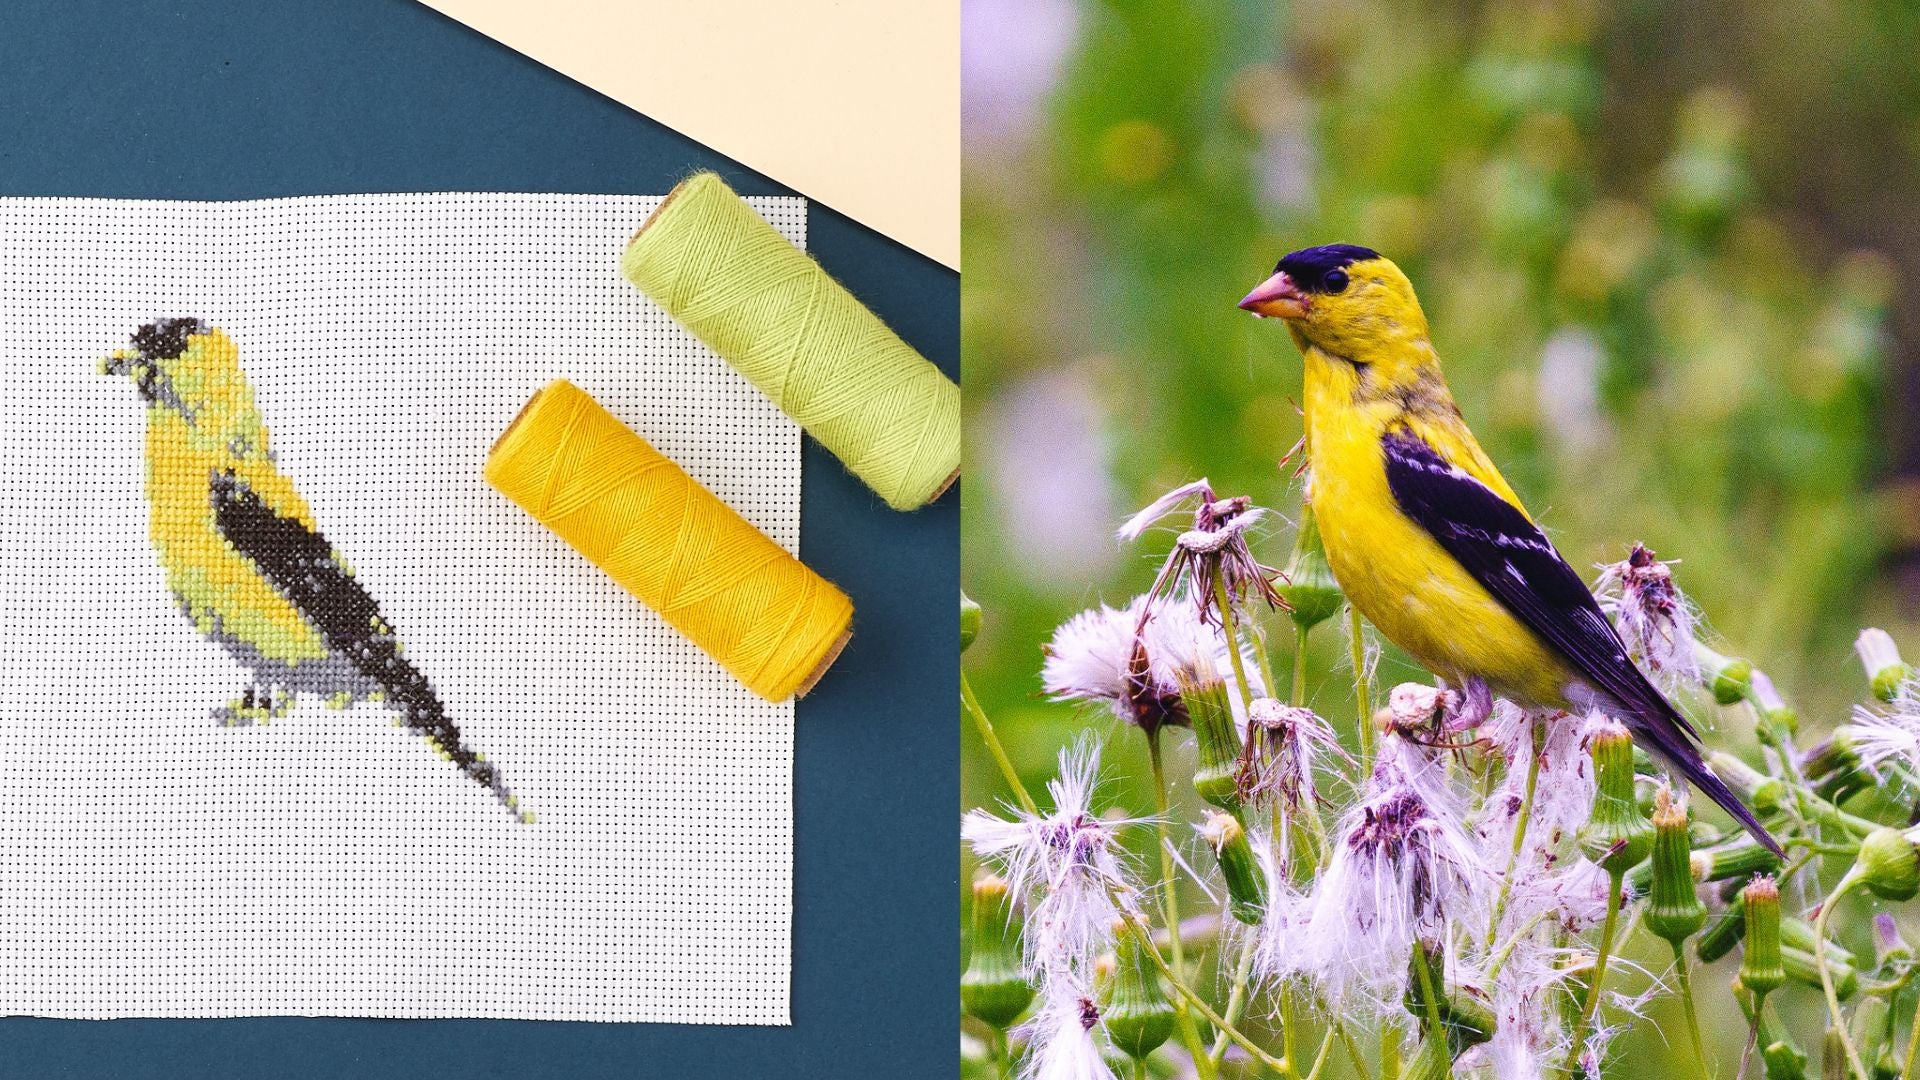 How To Adapt Photographs into Cross Stitch Patterns in FlossCross